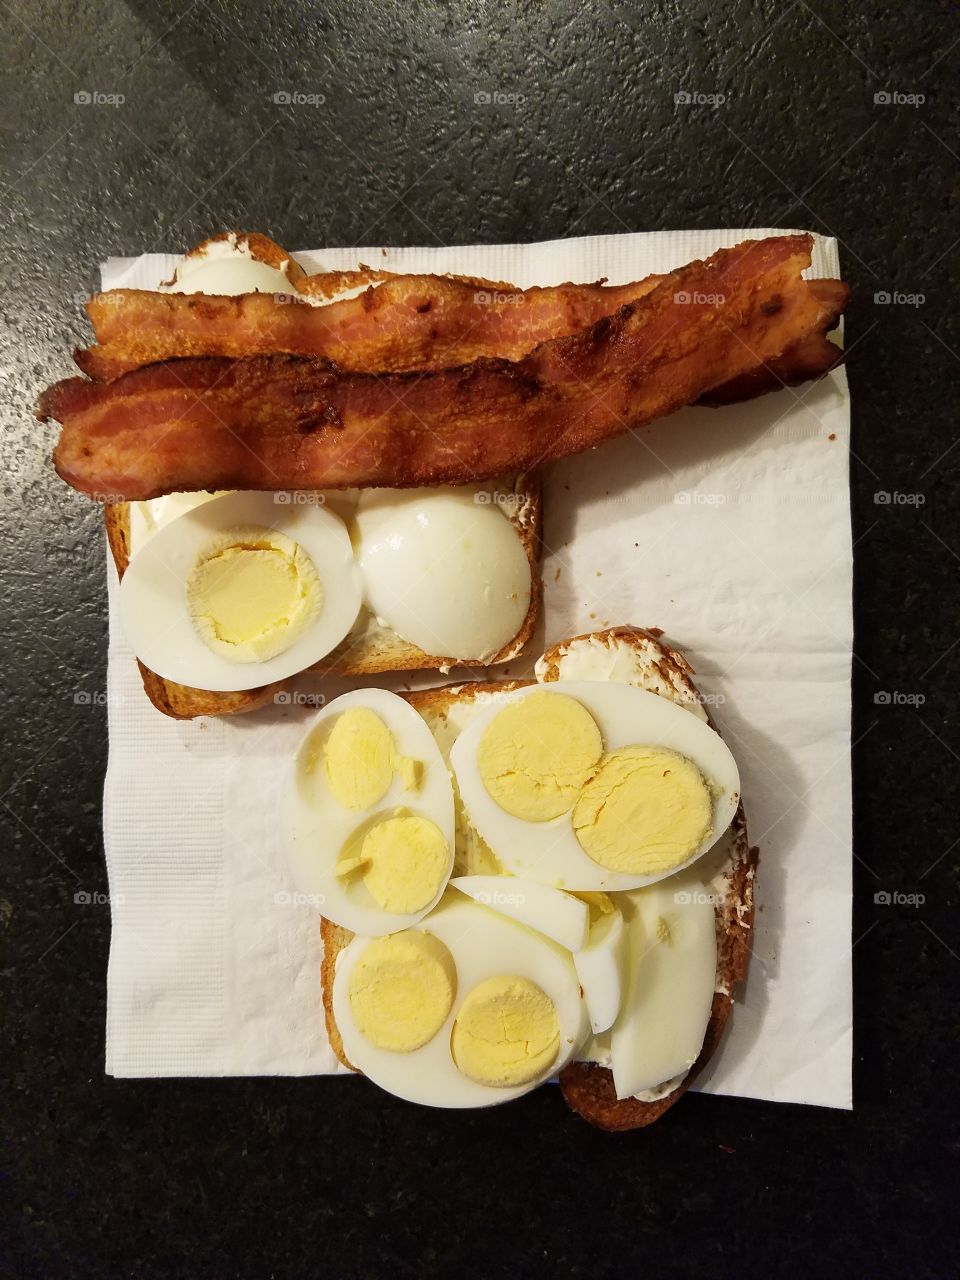 eggs and bacon